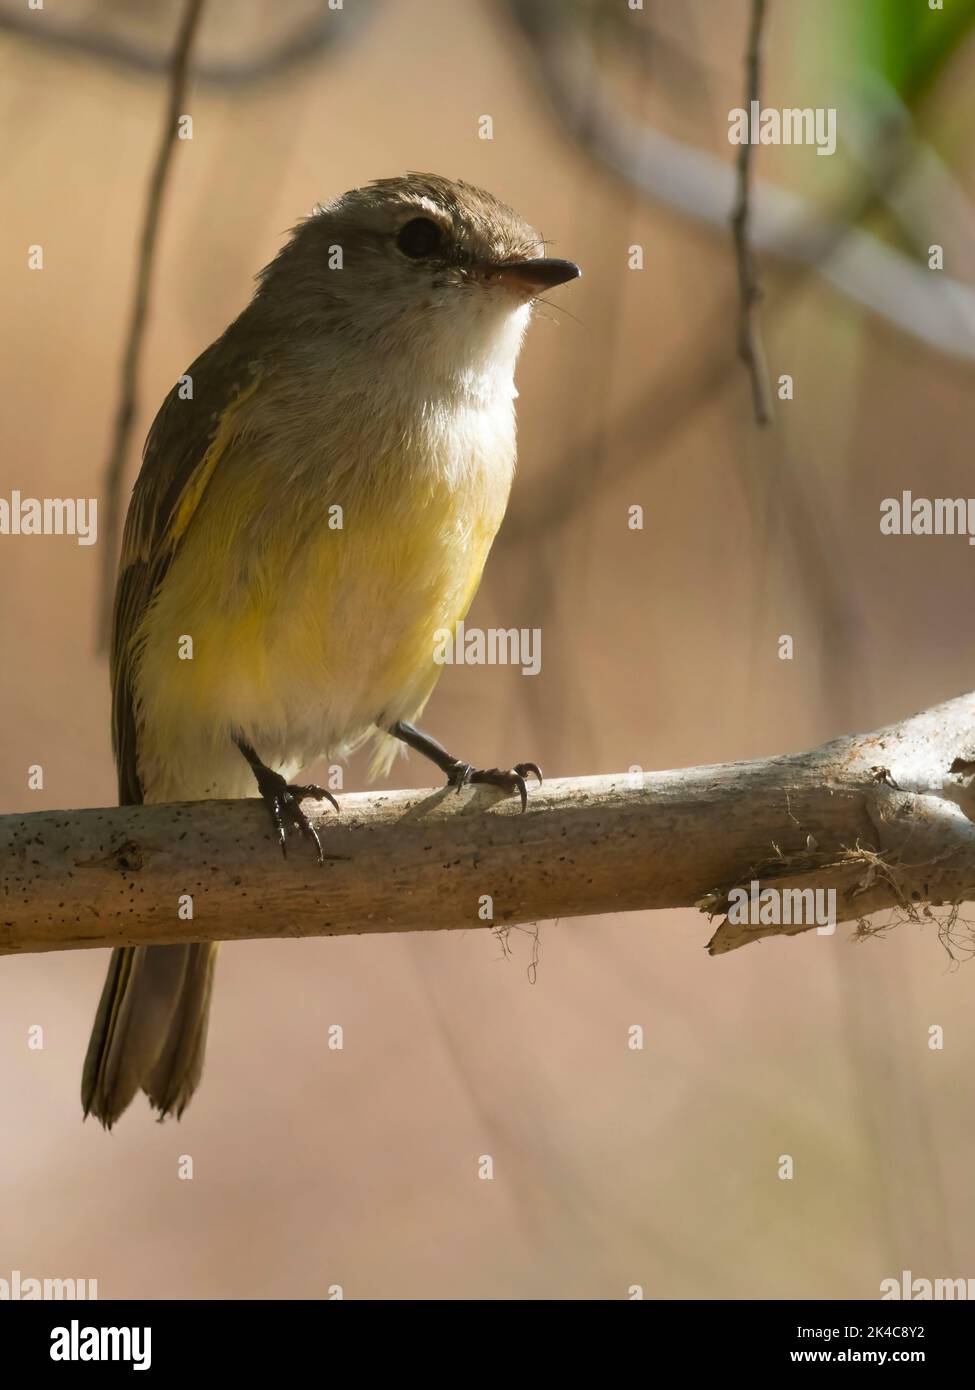 A vertical closeup of adorable Lemon-bellied flyrobin perched on a branch Stock Photo